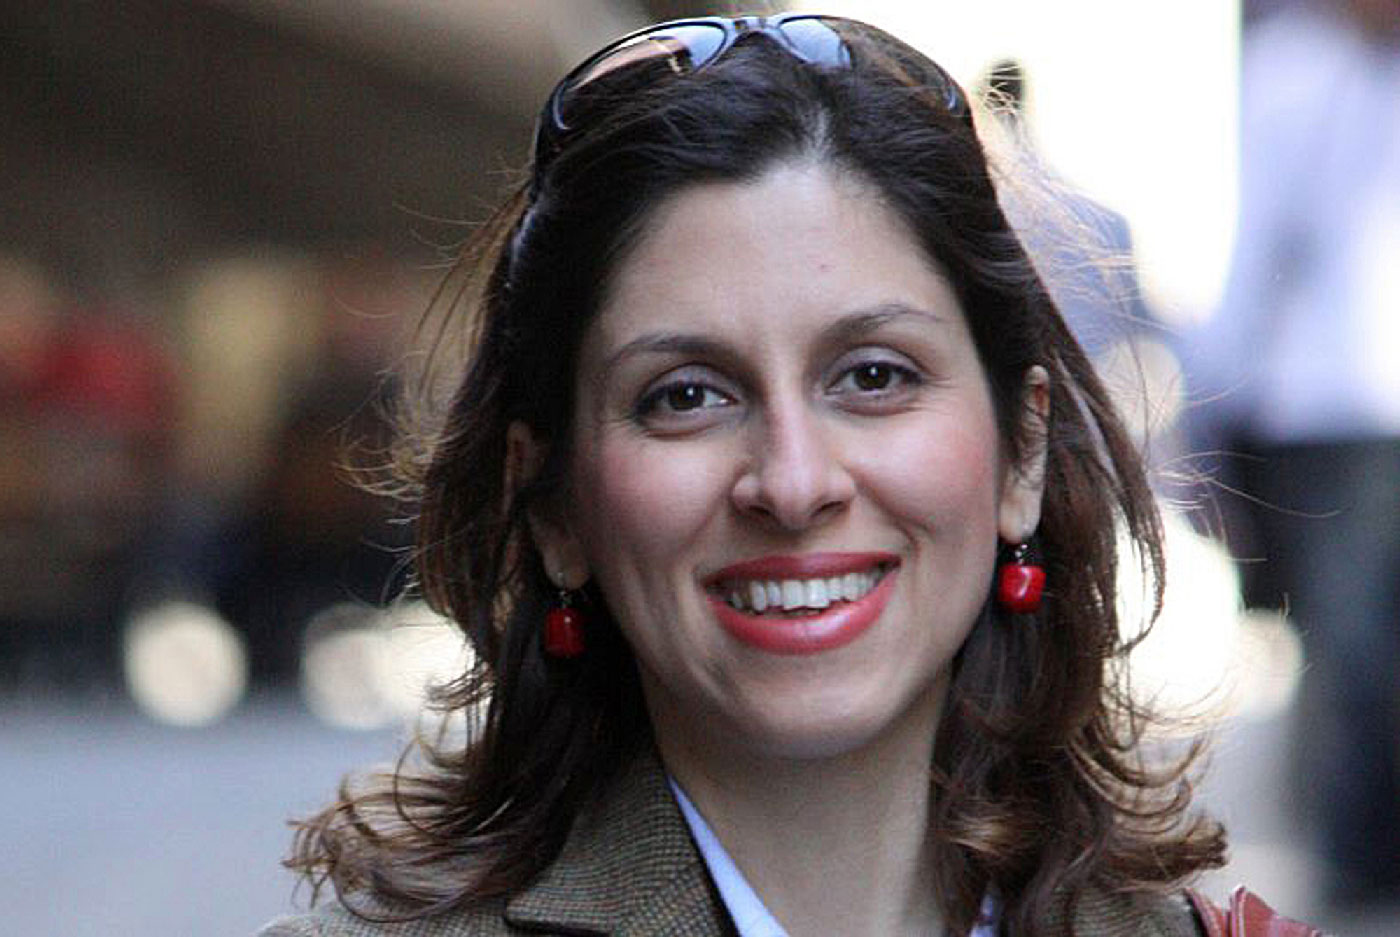 Zaghari-Ratcliffe was arrested in April 2016 at a Tehran airport.